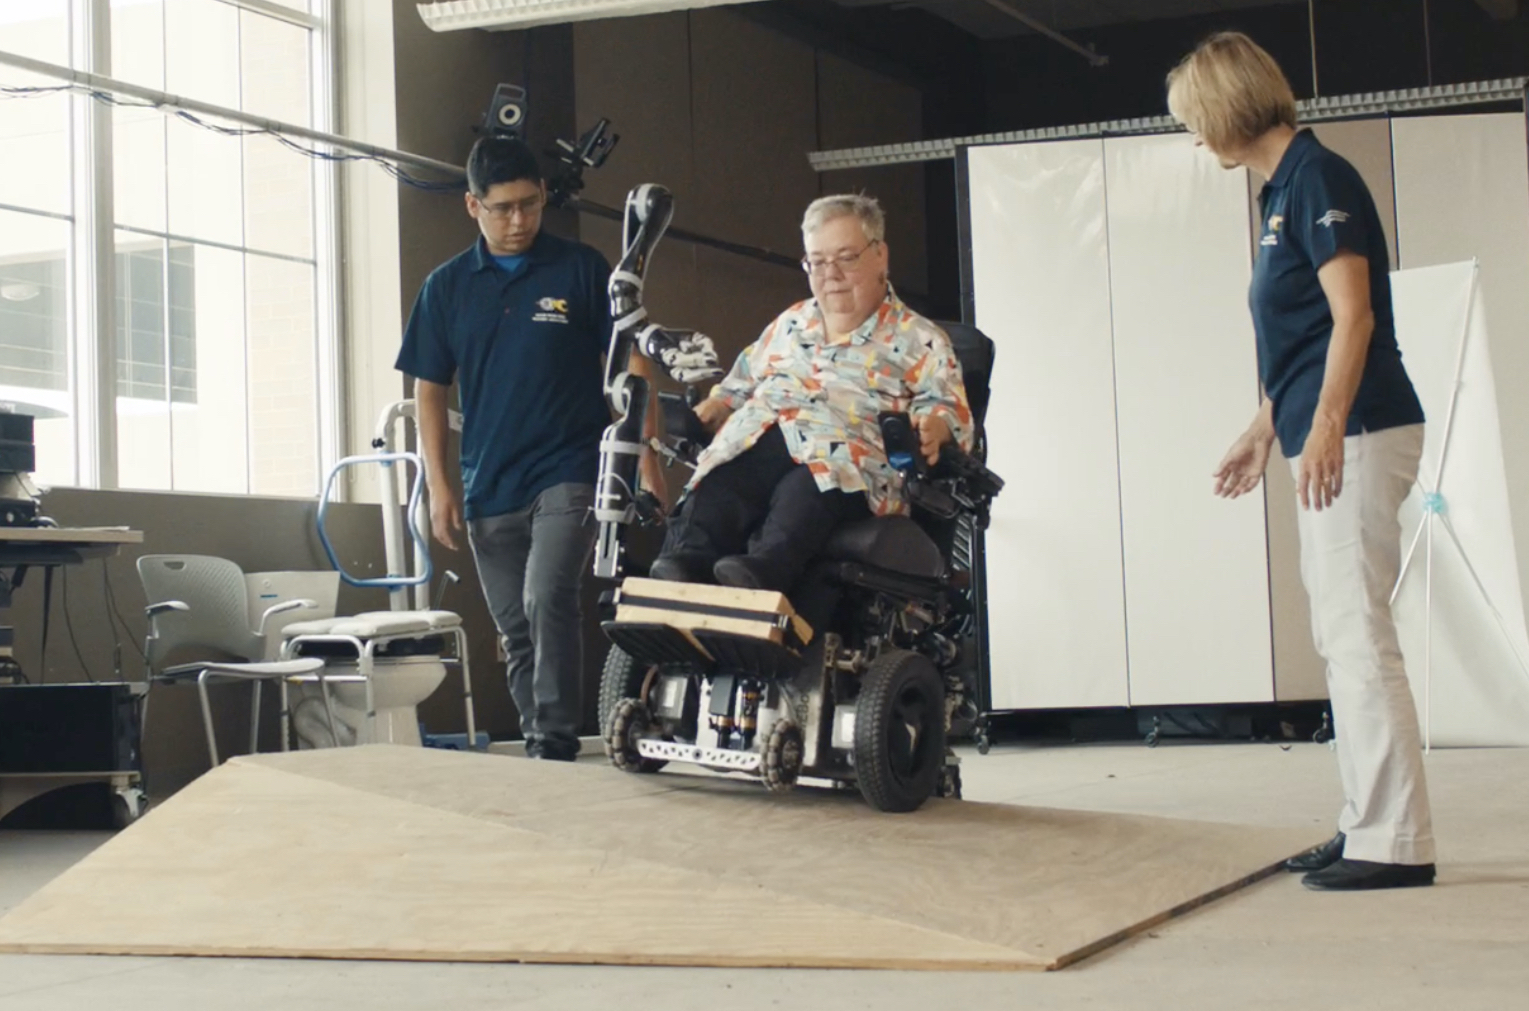 Film still of an older woman in a high-tech wheelchair in a laboratory. She is driving over a wooden ramp with bumps and edges, designed to test the wheelchair. Two people in uniform polo shirts are watching her on either side.